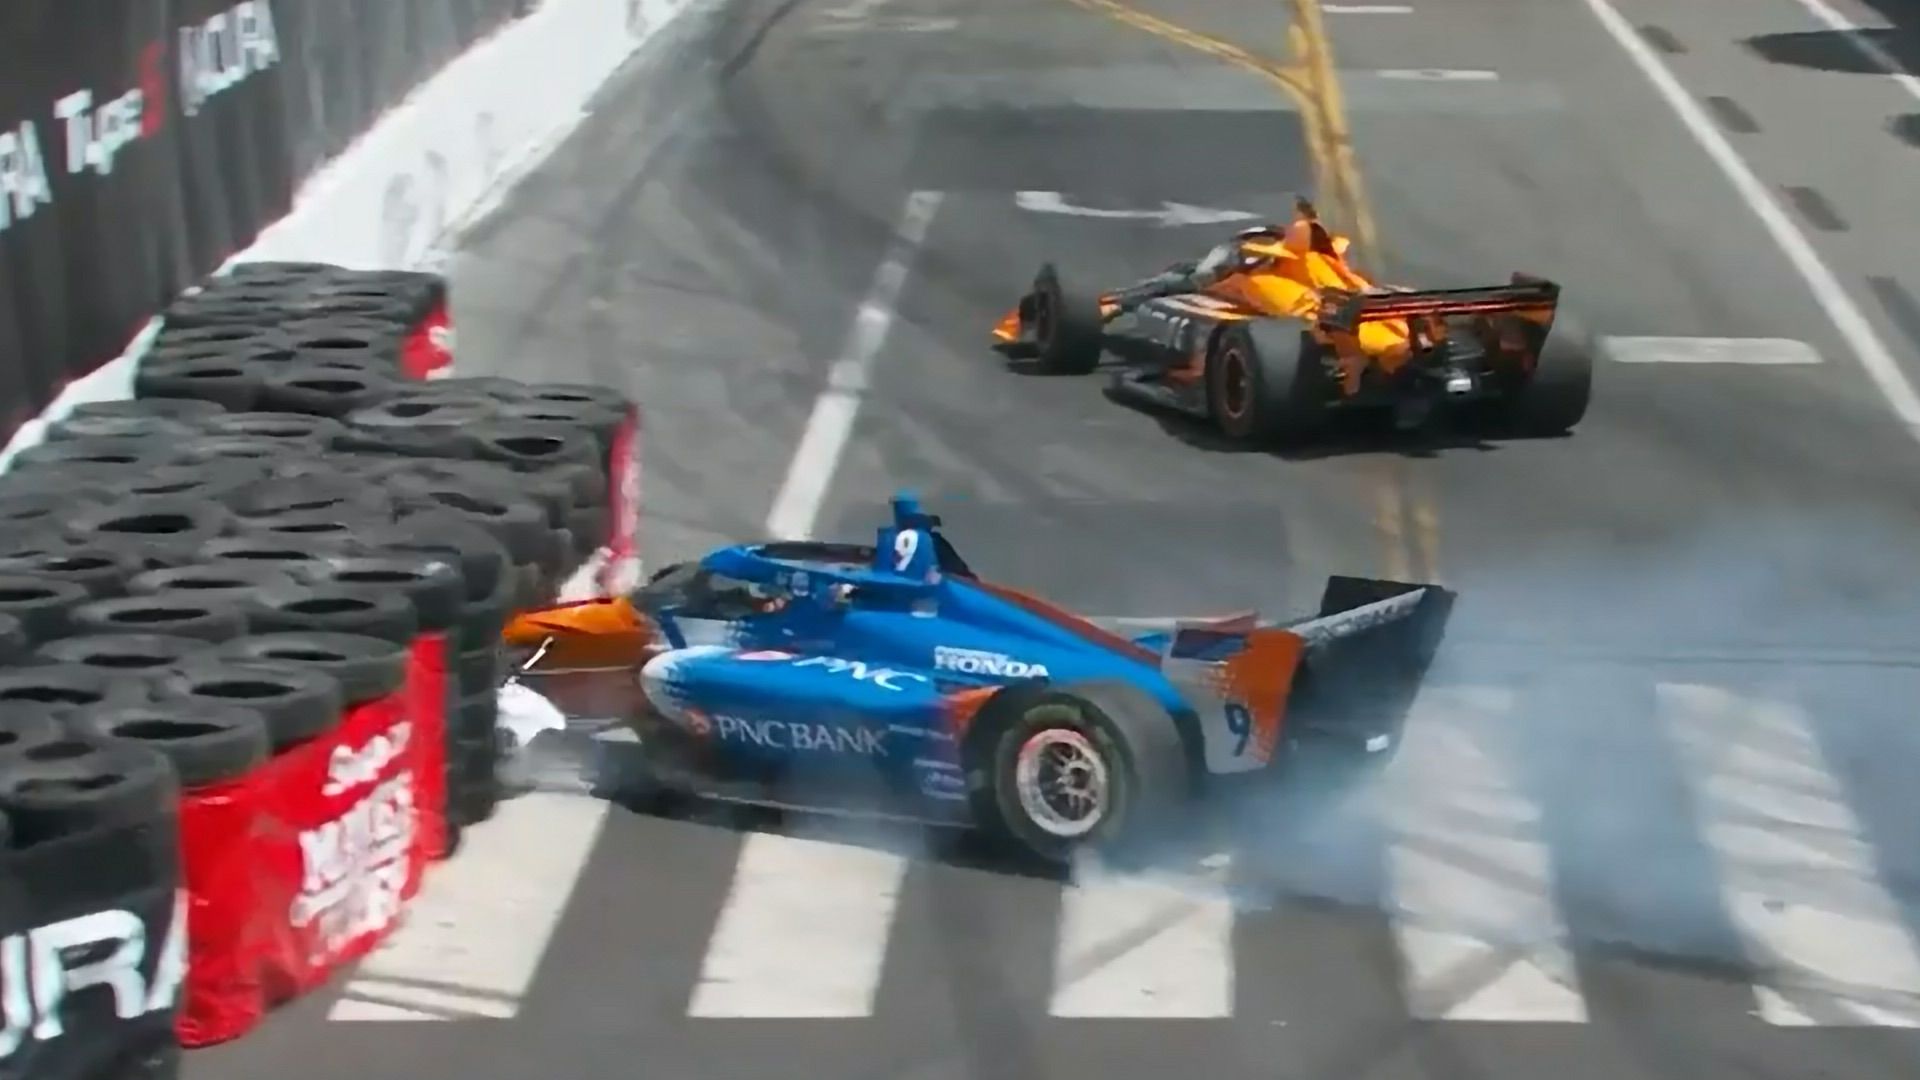 Scott Dixon&#x27;s car gets buried in the tyre wall after contact from Pato O&#x27;Ward.Scott Dixon&#x27;s car gets buried in the tyre wall after contact from Pato O&#x27;Ward.